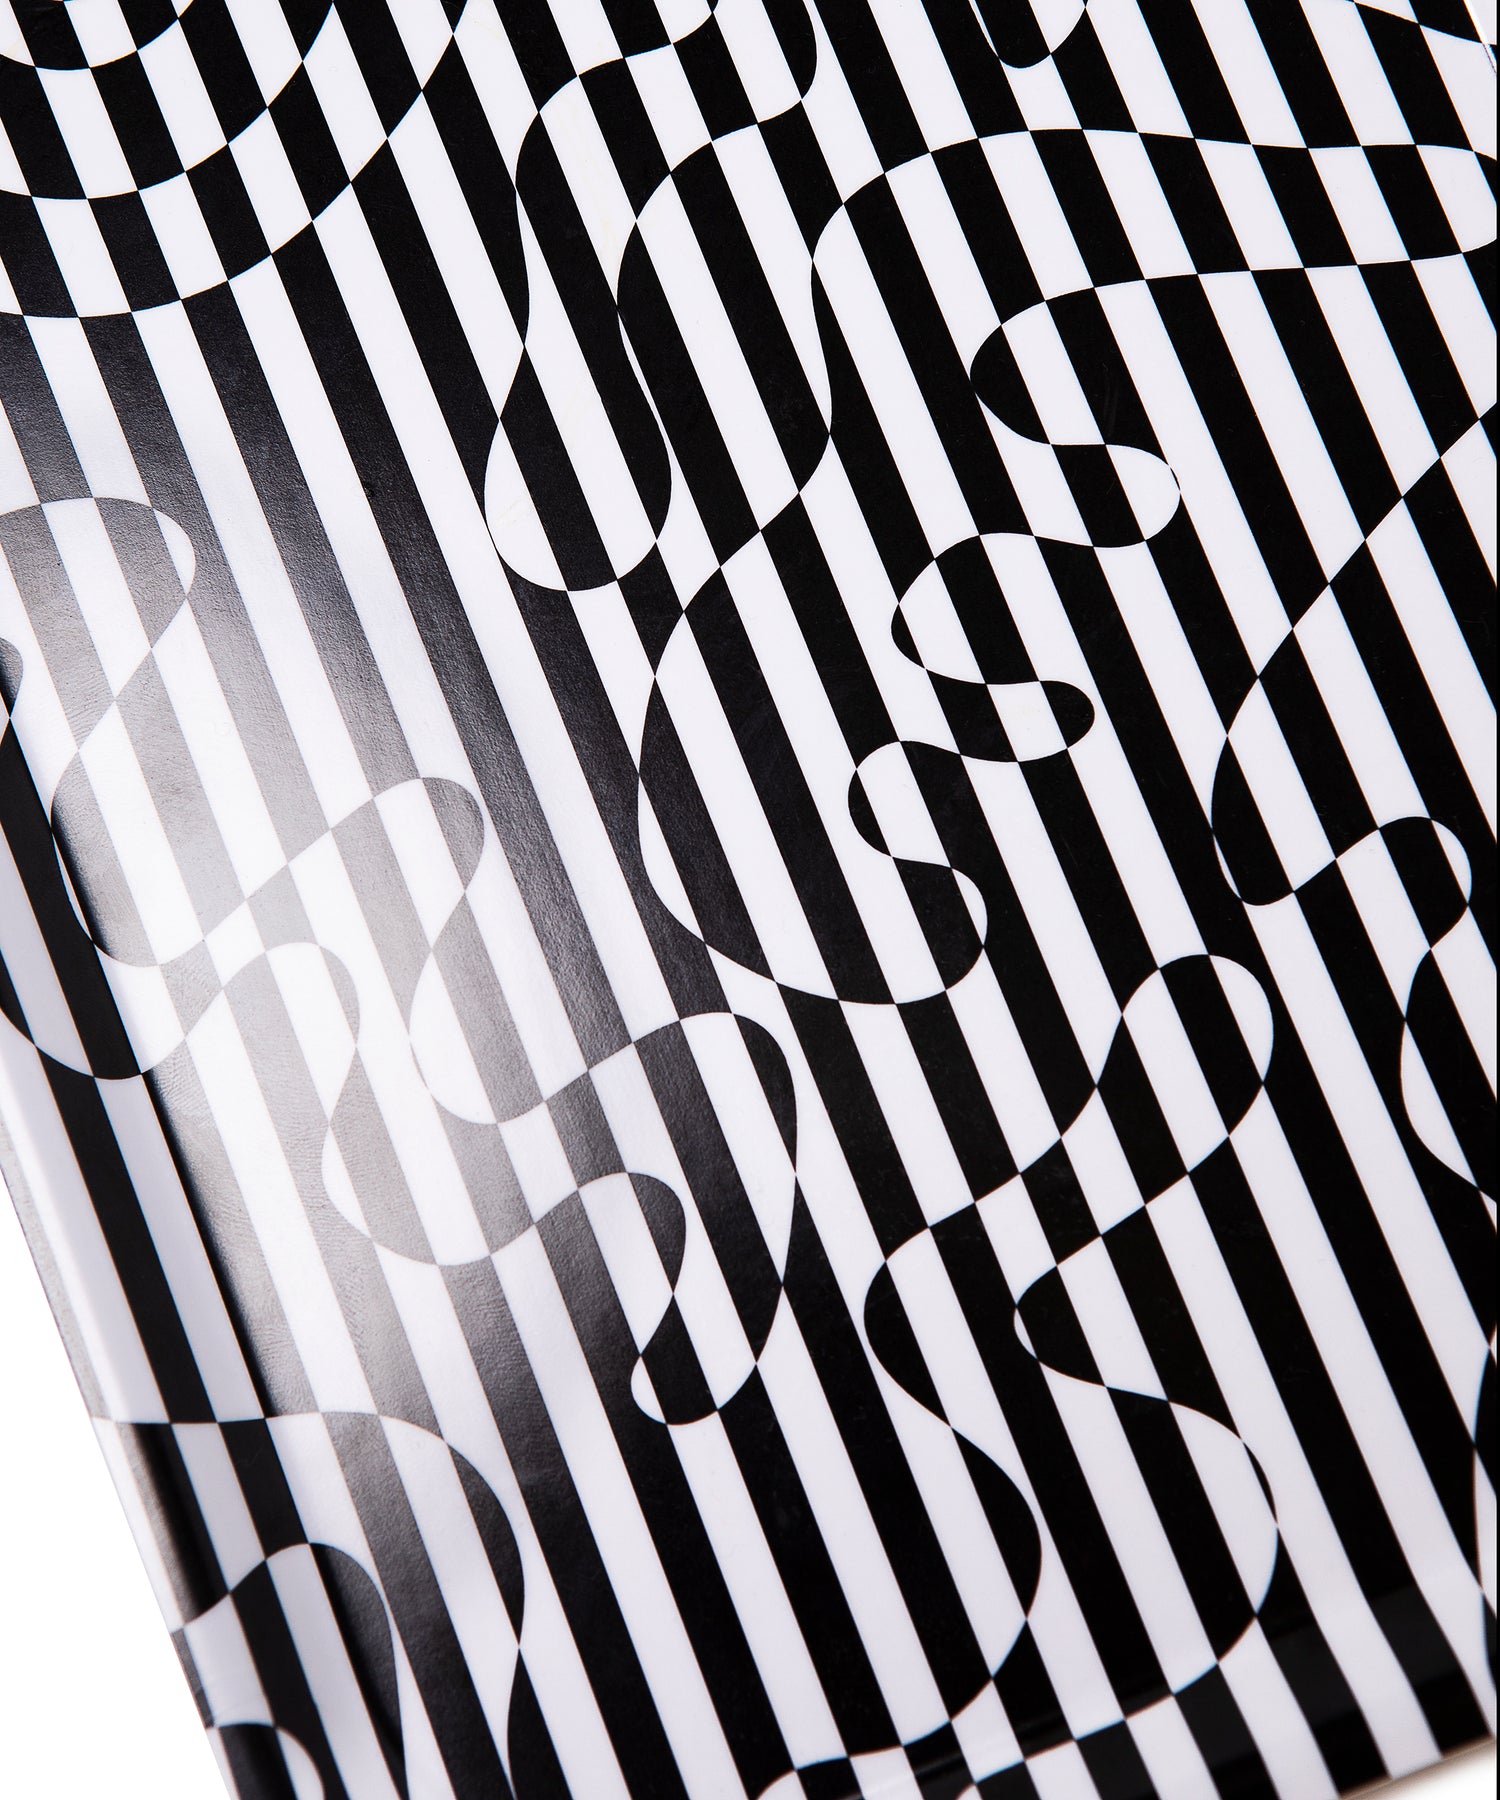 Close up of Dazzle Tray showing the black and white striped swirl design with a glossy sheen.